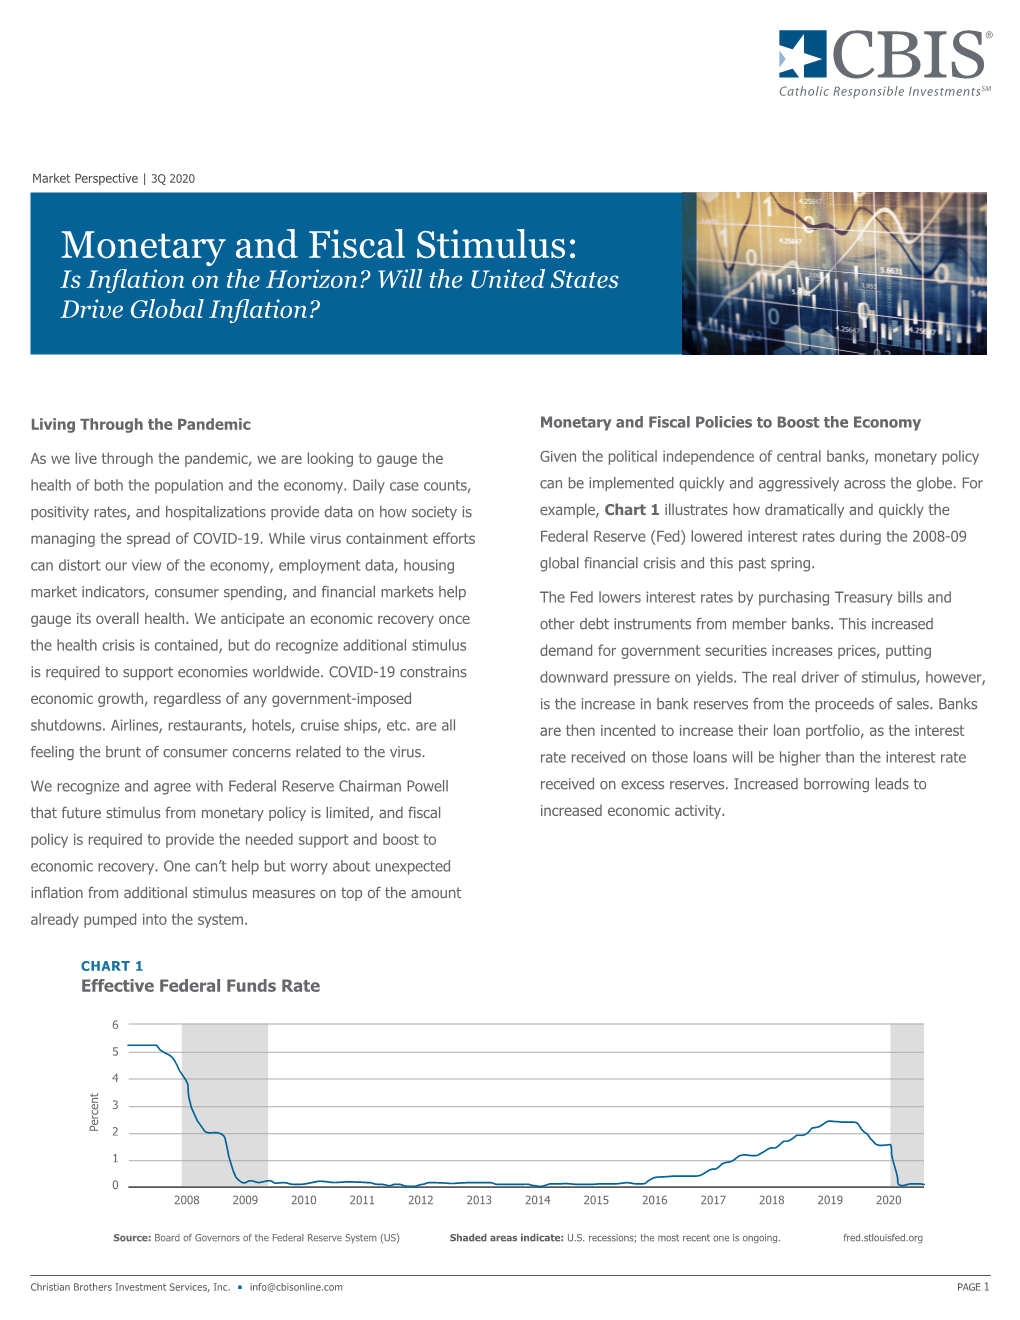 3Q2020 Market Perspective: Monetary and Fiscal Stimulus